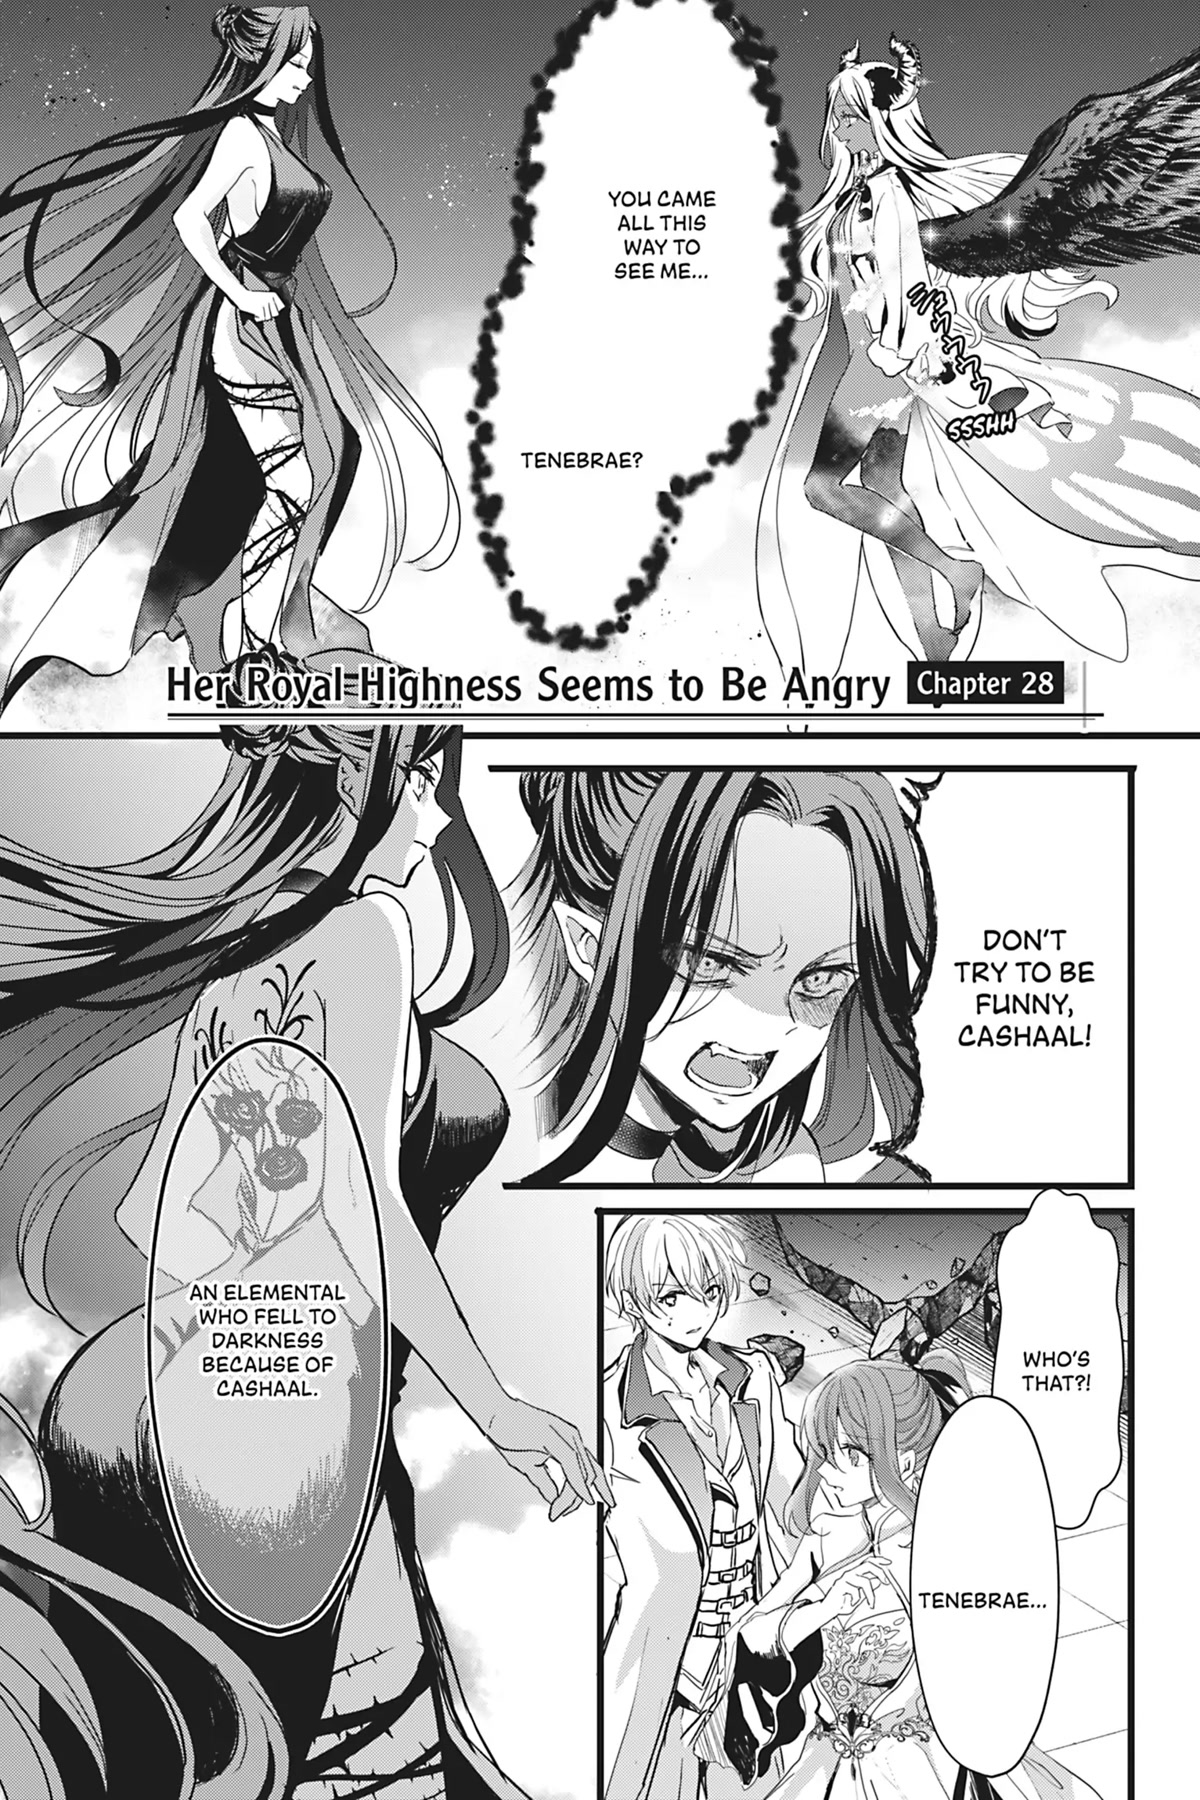 Her Royal Highness Seems To Be Angry Chapter 28 #1